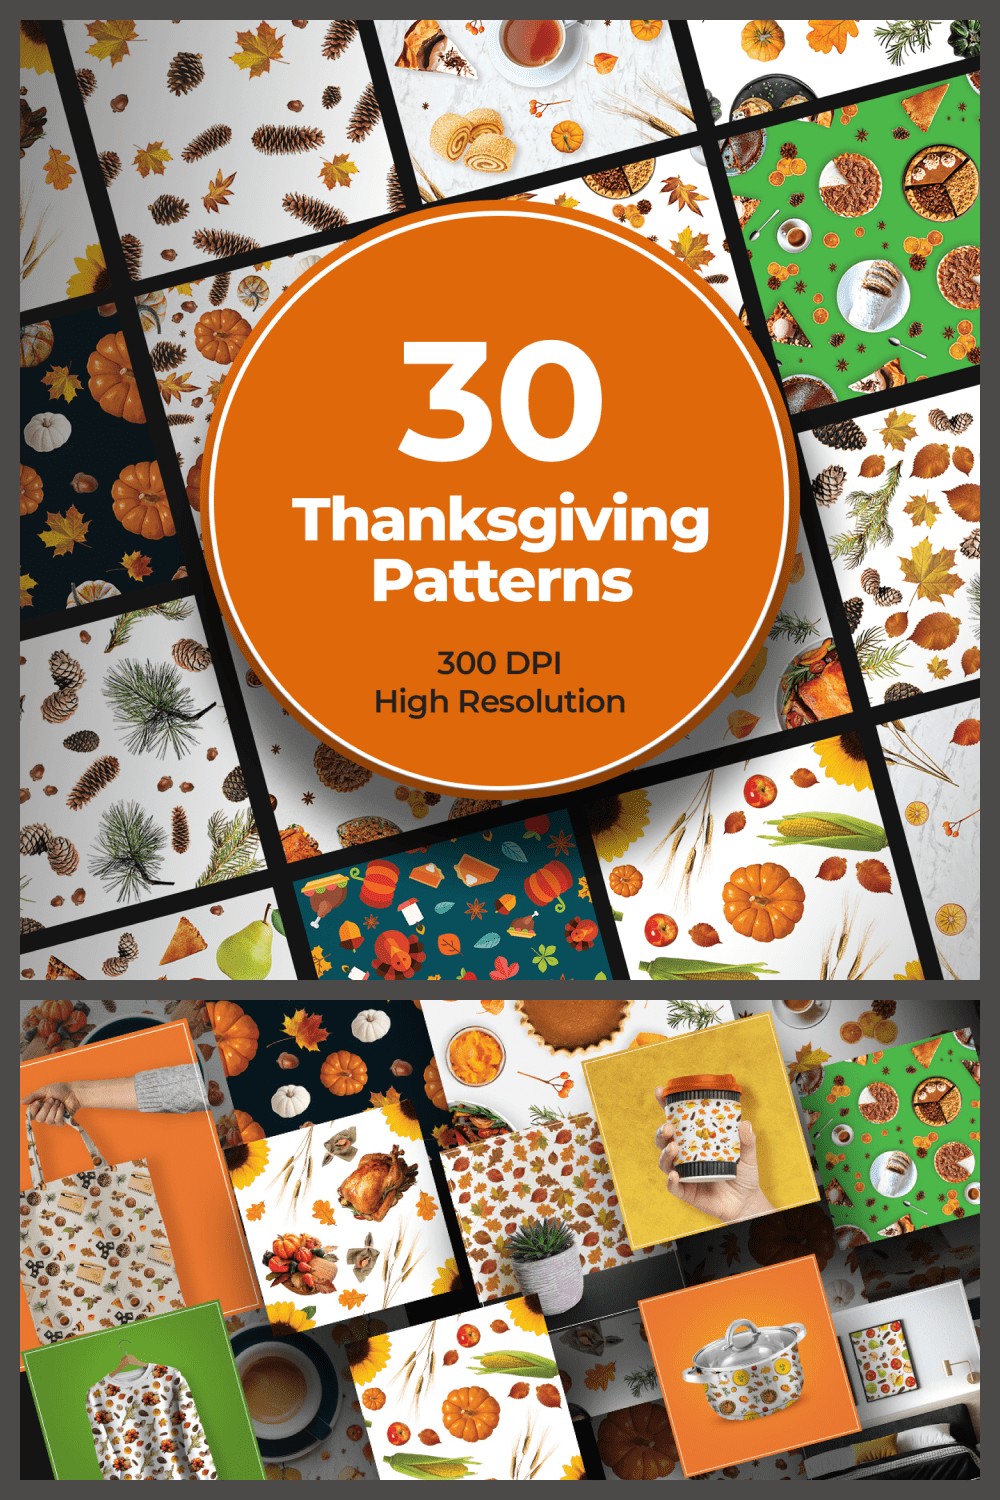 Big collection of the colorful Thanksgiving patterns.